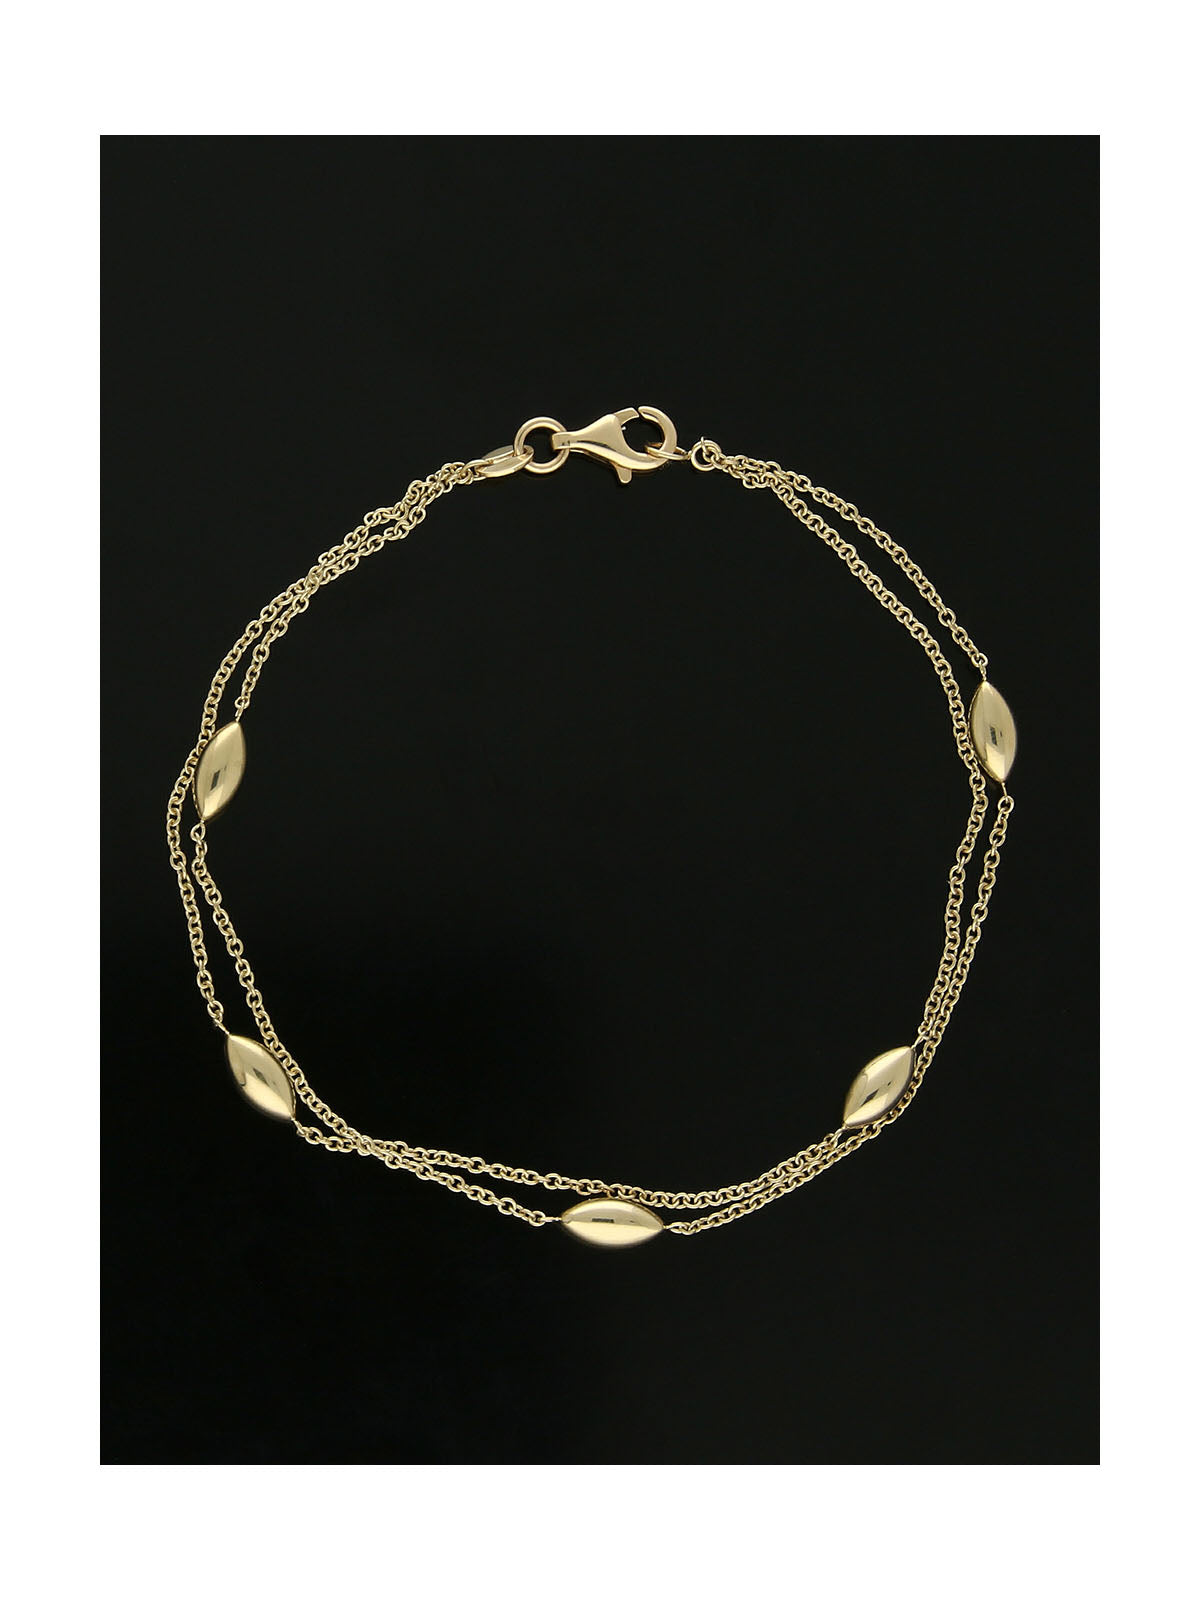 Polish Double Row Marquise Bead Station Bracelet in 9ct Yellow Gold